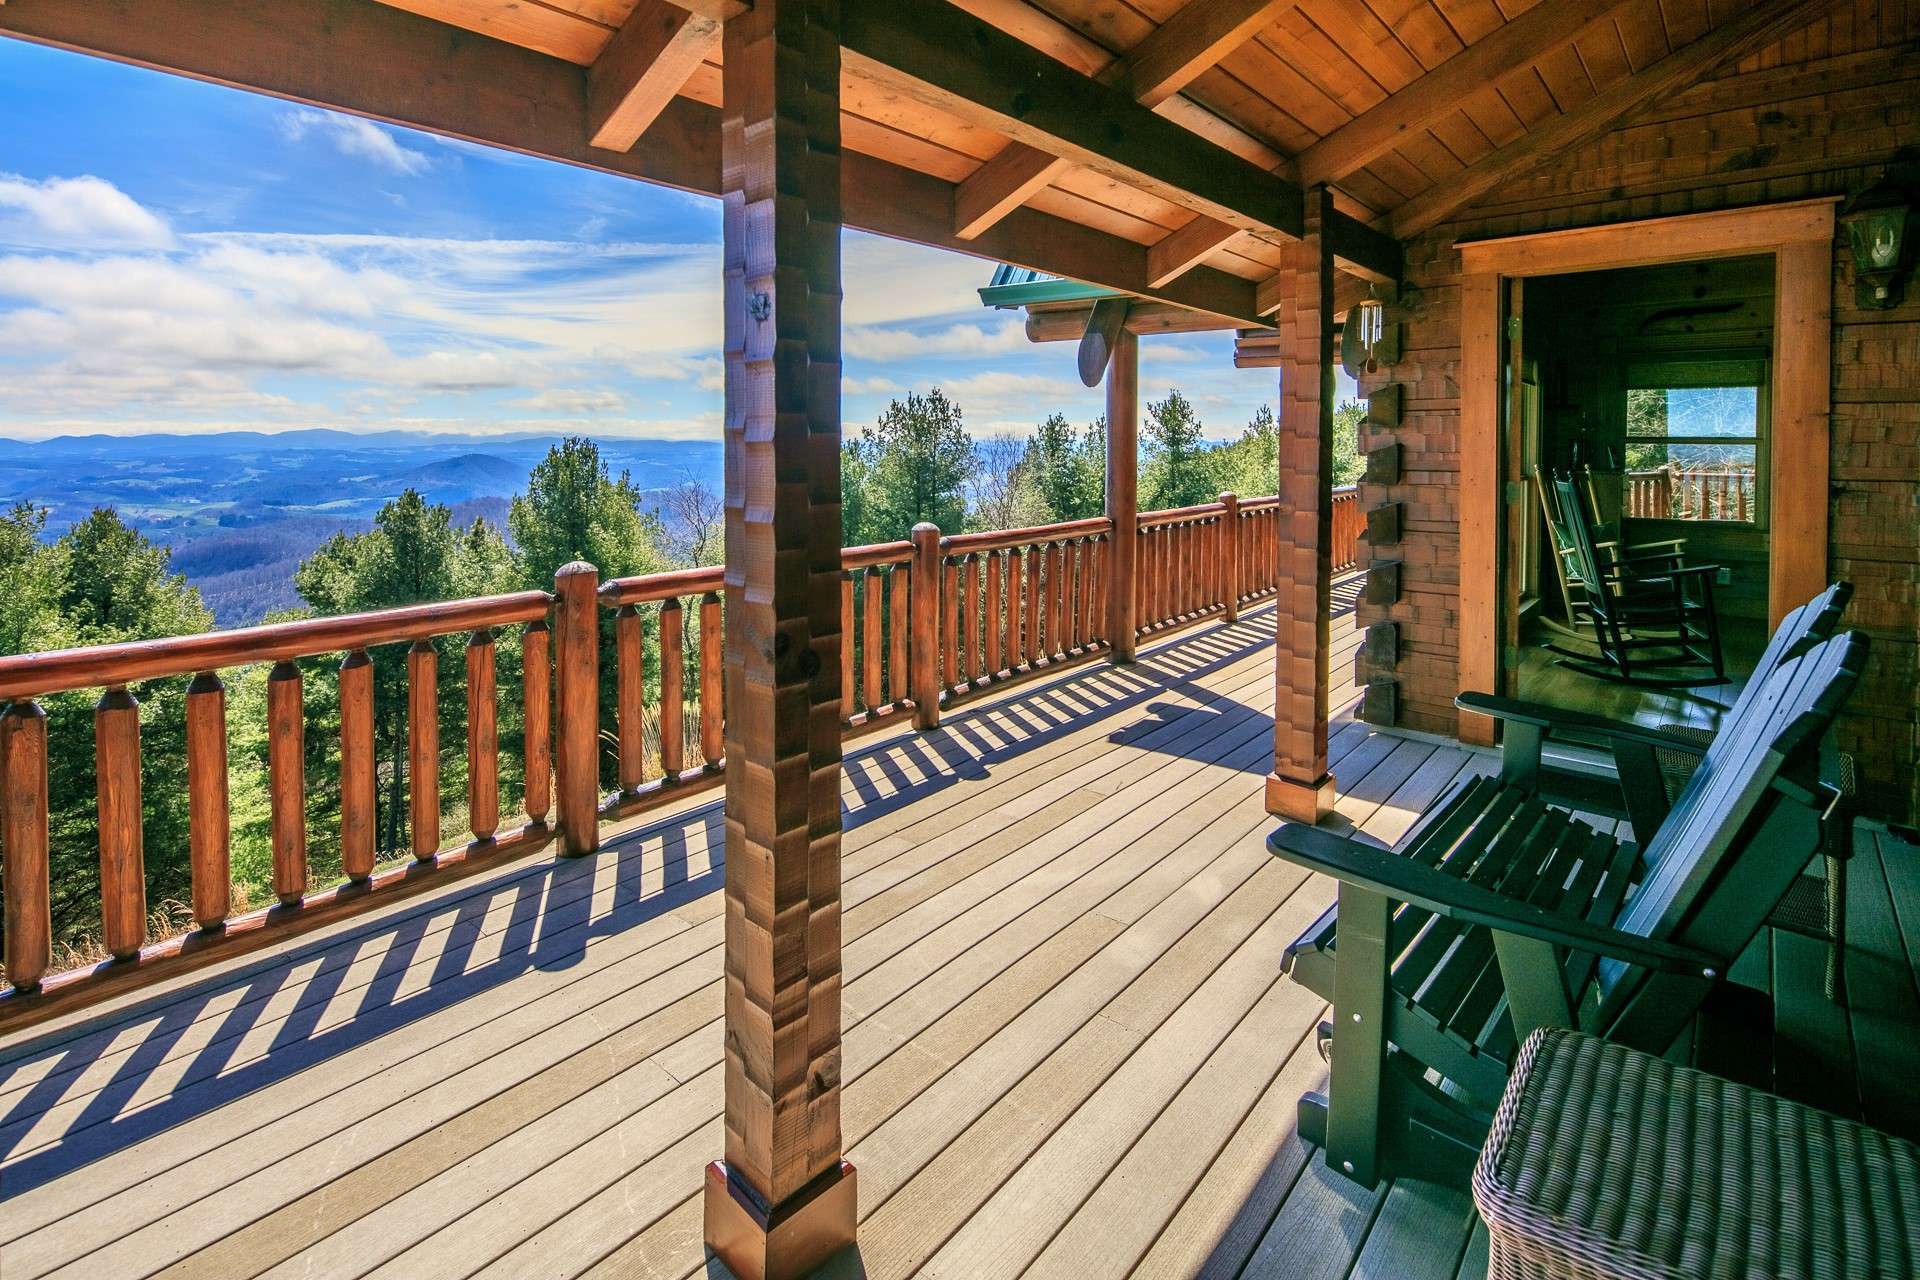 The main level opens to a partially covered wrap around deck to enjoy outdoor grilling, dining, and entertaining while enjoying breathtaking panoramic long range views.